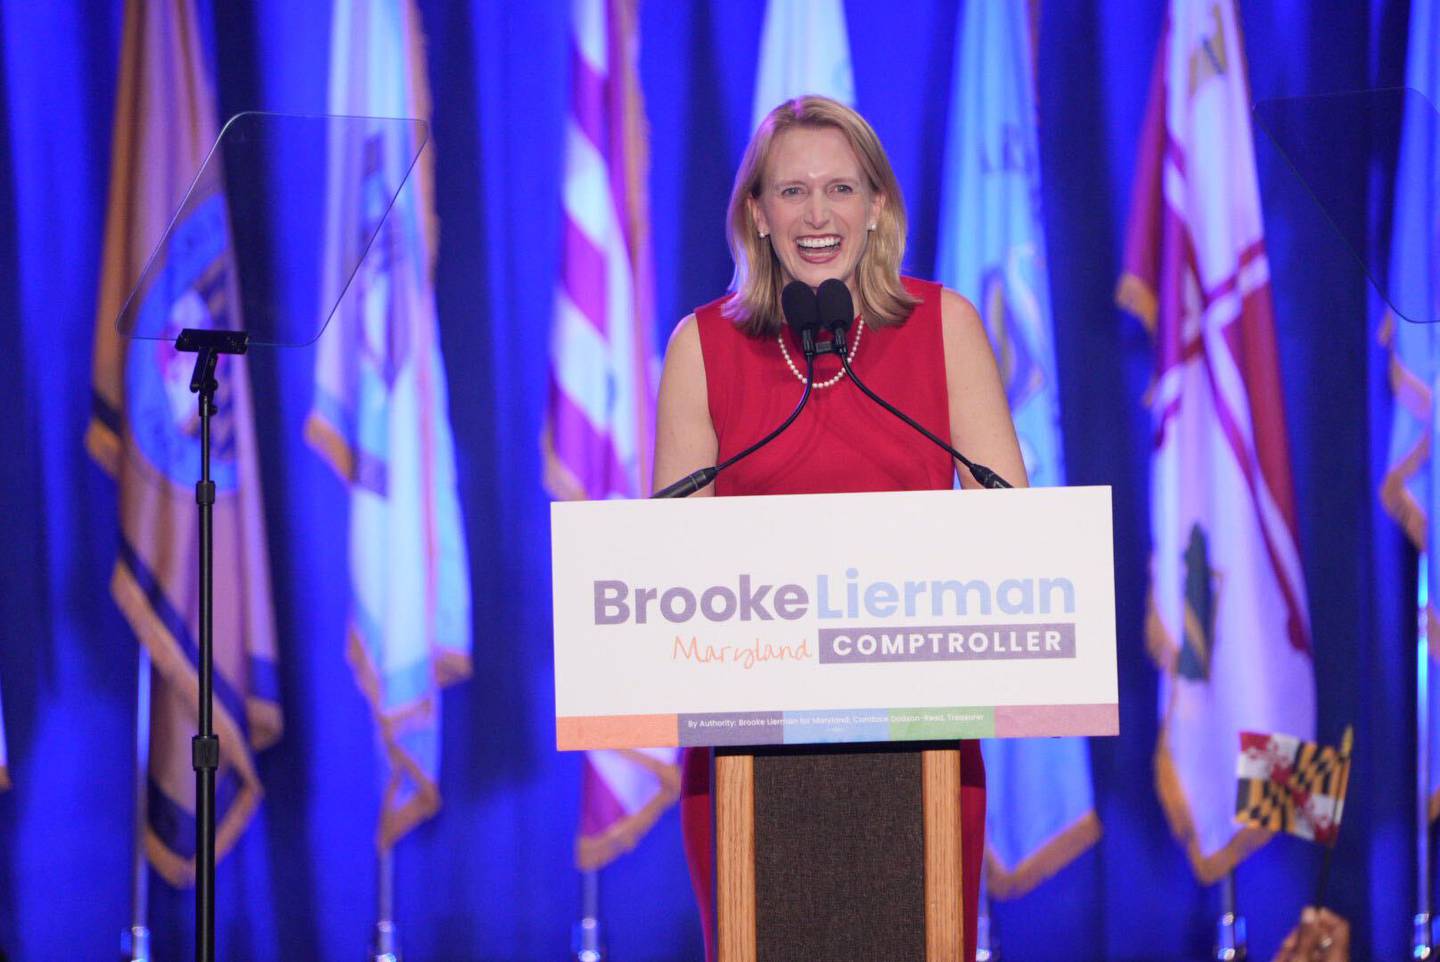 Comptroller candidate Brooke Lierman addresses the crowd at the 2022 Democratic election night party.